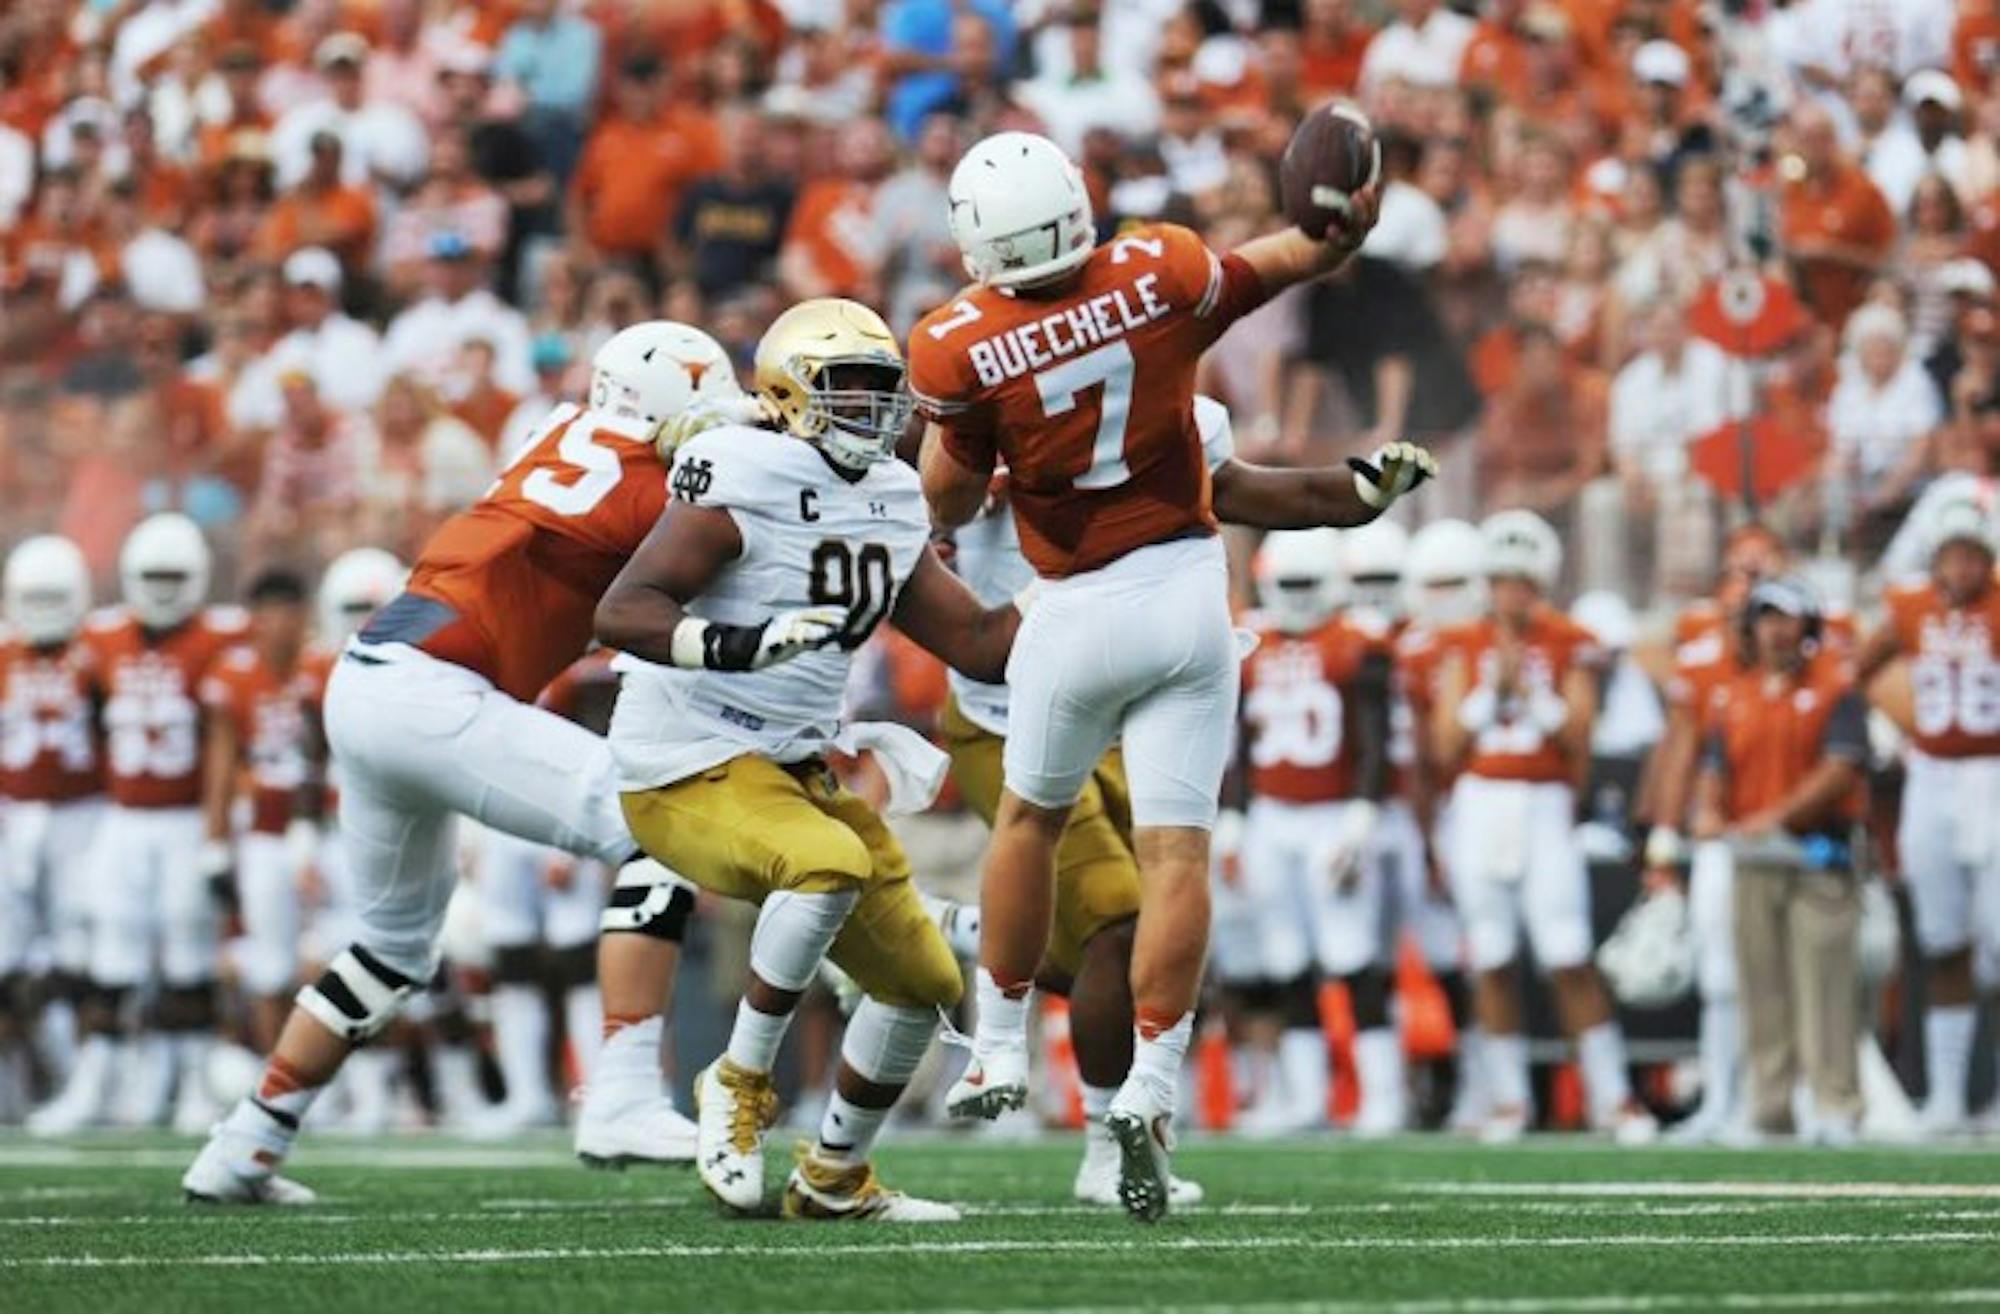 Texas freshman quarterback Shane Buechele gets ready to throw in Texas’ 50-47 win. Buechele threw for 280 yards on 16-of-26 passing with two touchdowns in addition to 33  rushing yards. Texas senior quarterback Tyrone Swoopes also contributed 53 rushing yards and three touchdowns as the Longhorns had 517 yards of total offense and 26 first downs.